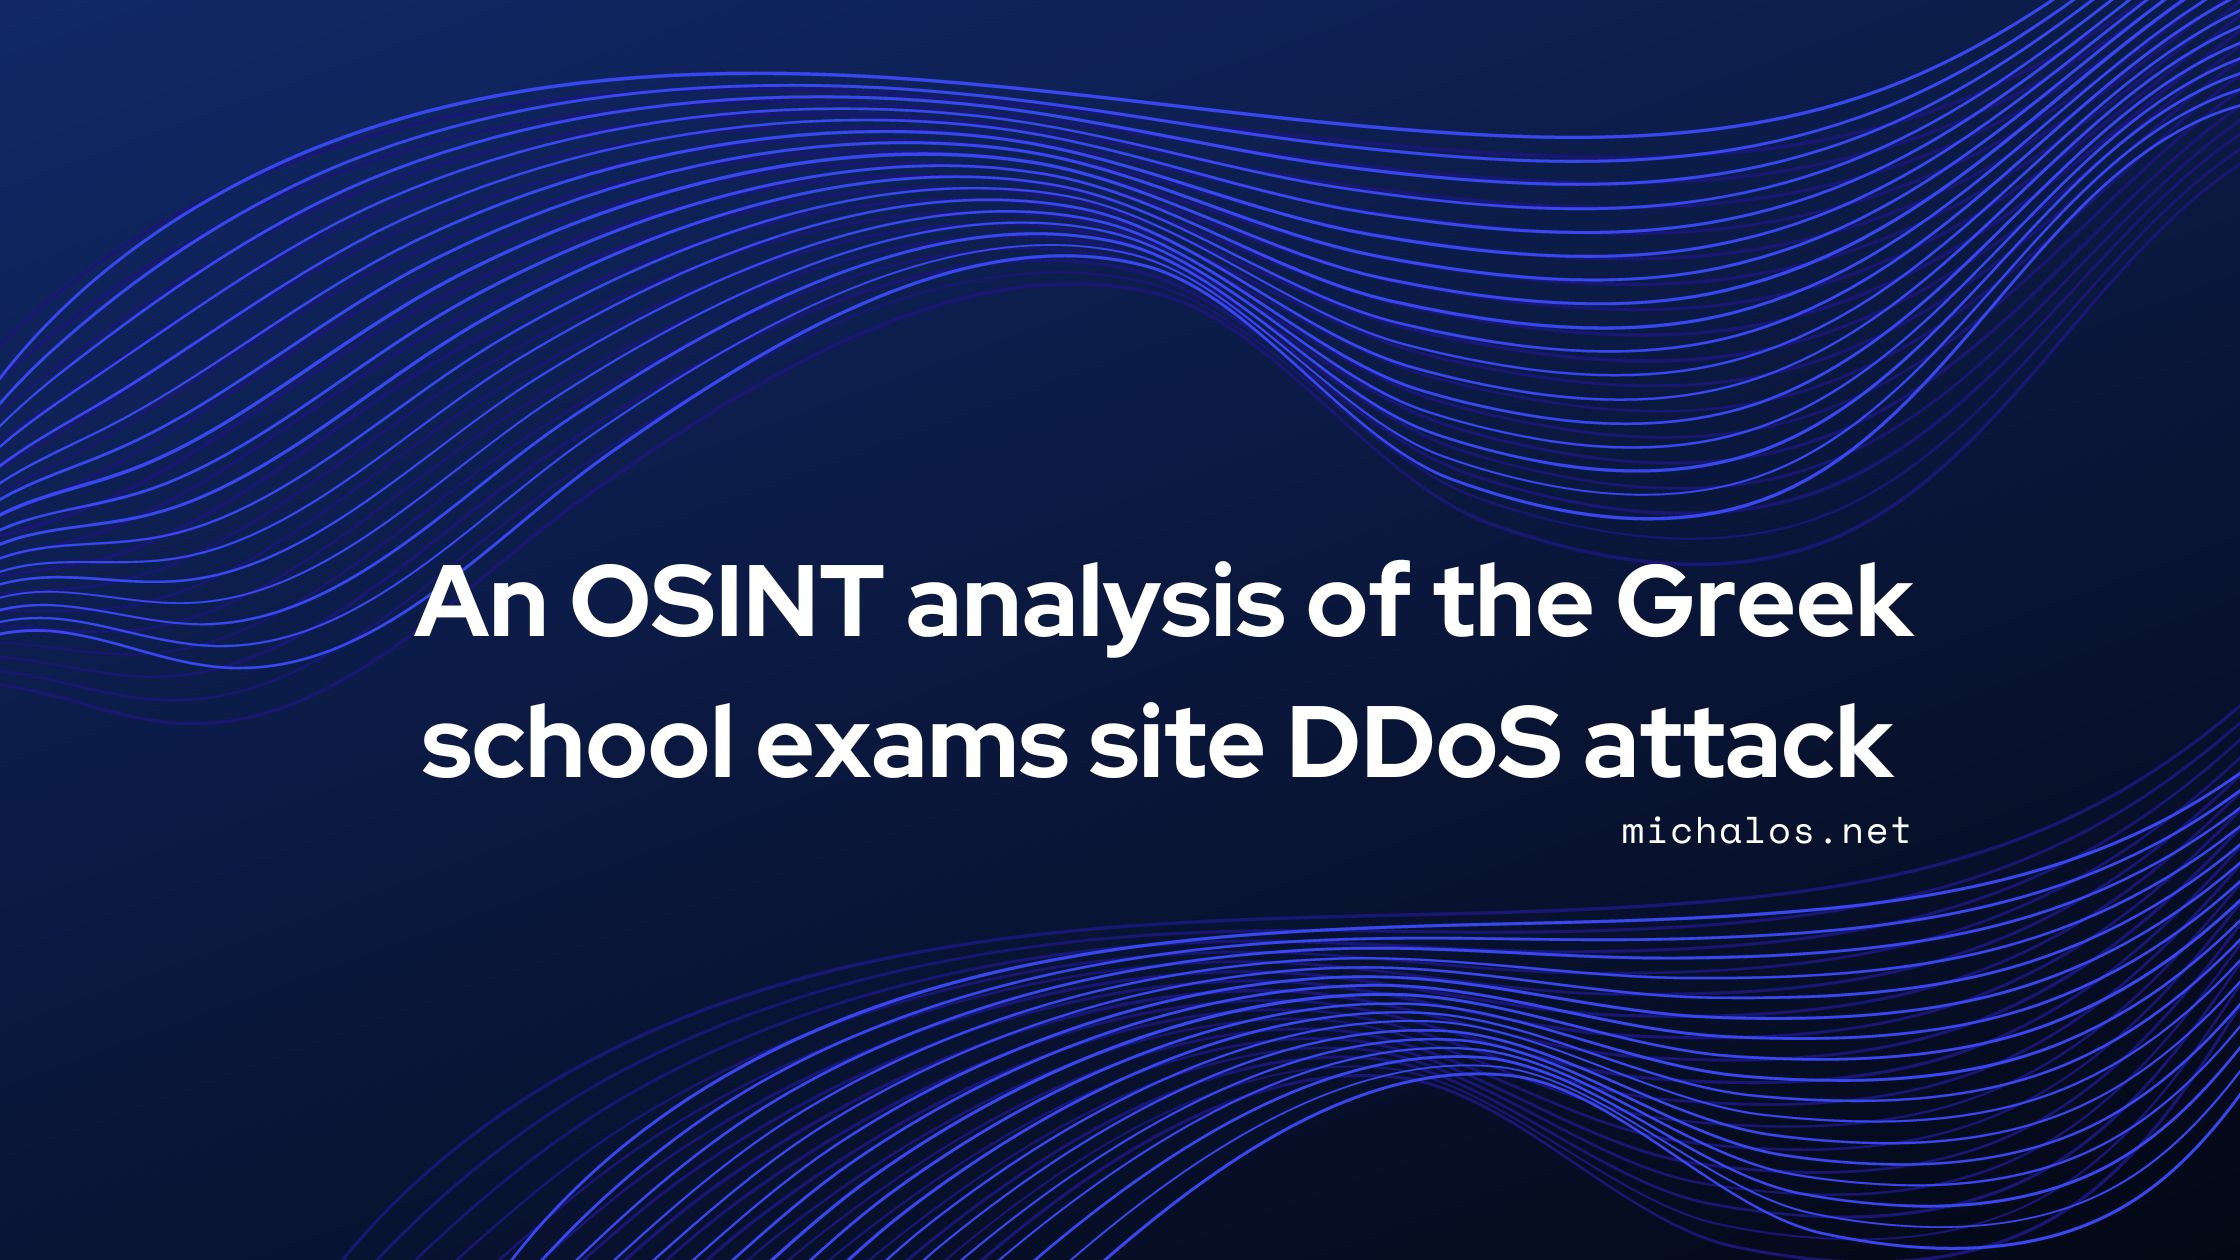 An OSINT analysis of the Greek school exams site DDoS attack